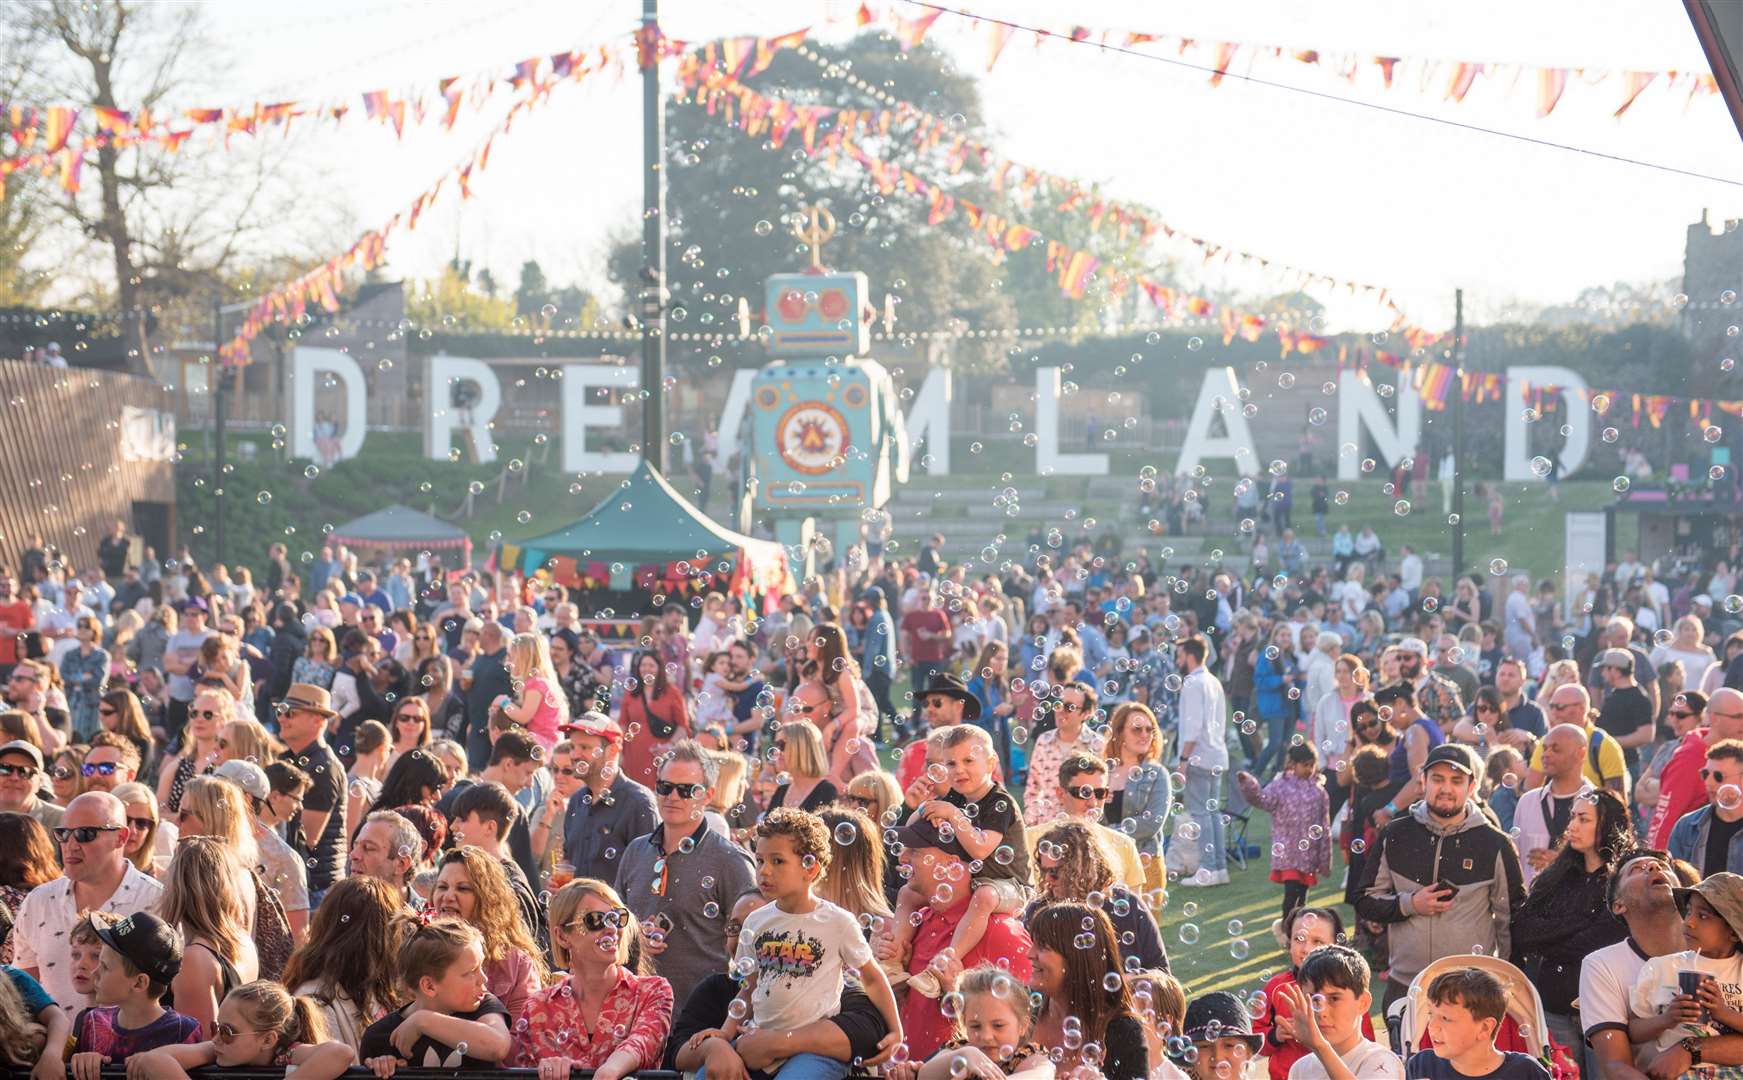 Bubbles, live music and the Love Bot at Camp Bestival at Dreamland